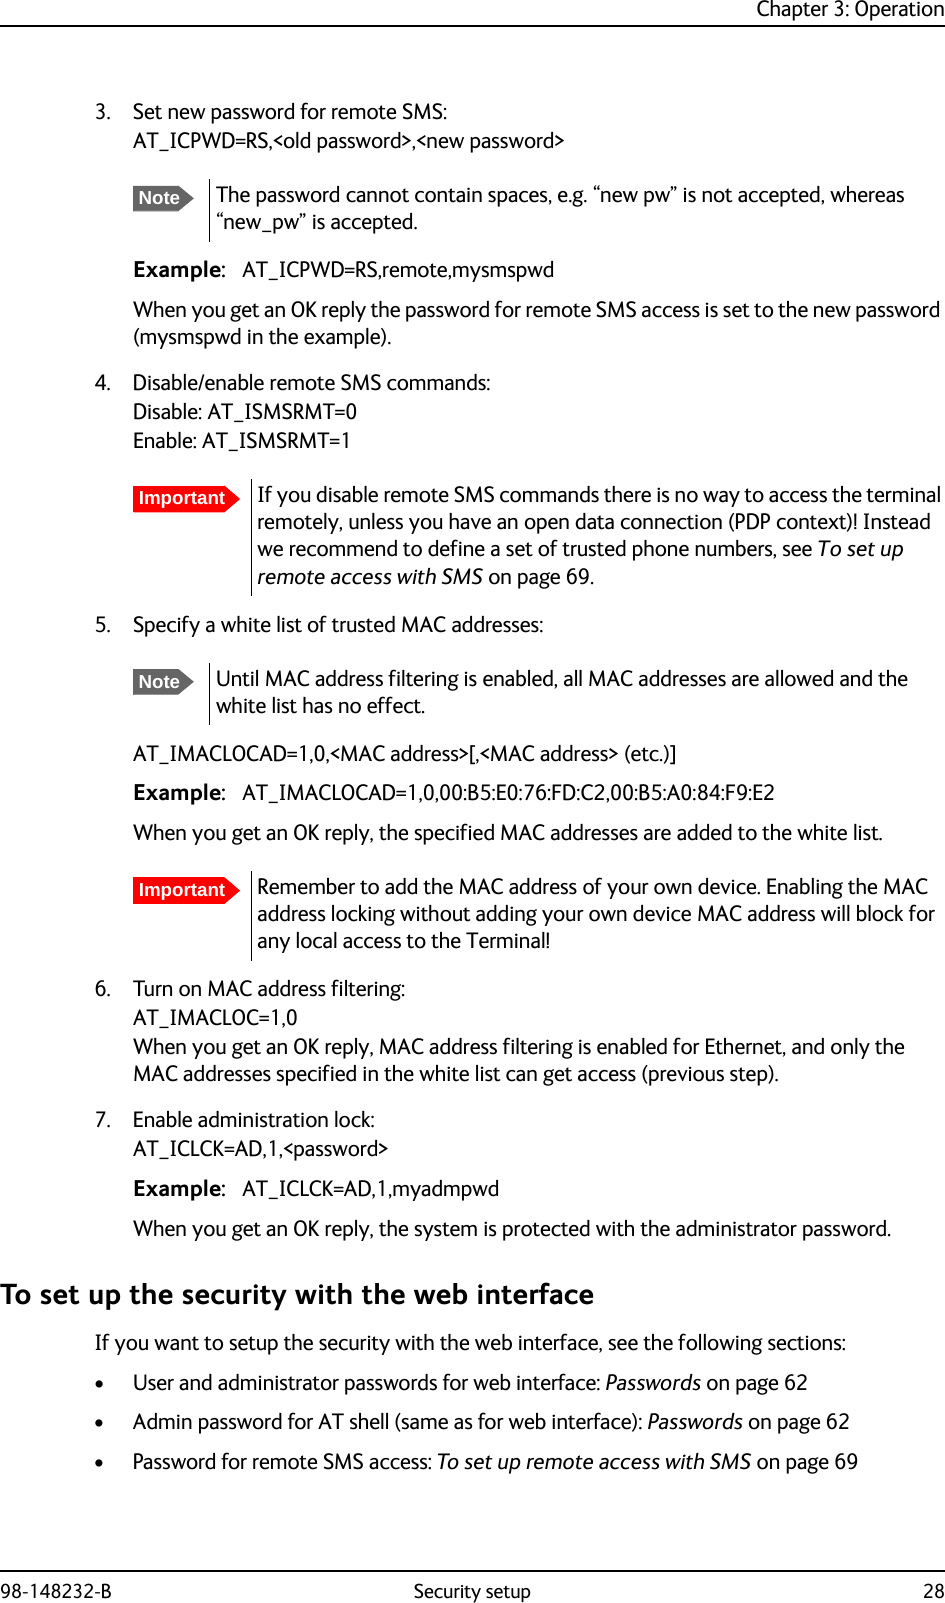 Chapter 3: Operation98-148232-B Security setup 283. Set new password for remote SMS:AT_ICPWD=RS,&lt;old password&gt;,&lt;new password&gt;Example: AT_ICPWD=RS,remote,mysmspwdWhen you get an OK reply the password for remote SMS access is set to the new password (mysmspwd in the example).4. Disable/enable remote SMS commands:Disable: AT_ISMSRMT=0Enable: AT_ISMSRMT=15. Specify a white list of trusted MAC addresses:AT_IMACLOCAD=1,0,&lt;MAC address&gt;[,&lt;MAC address&gt; (etc.)]Example: AT_IMACLOCAD=1,0,00:B5:E0:76:FD:C2,00:B5:A0:84:F9:E2When you get an OK reply, the specified MAC addresses are added to the white list.6. Turn on MAC address filtering:AT_IMACLOC=1,0When you get an OK reply, MAC address filtering is enabled for Ethernet, and only the MAC addresses specified in the white list can get access (previous step). 7. Enable administration lock:AT_ICLCK=AD,1,&lt;password&gt;Example: AT_ICLCK=AD,1,myadmpwdWhen you get an OK reply, the system is protected with the administrator password.To set up the security with the web interfaceIf you want to setup the security with the web interface, see the following sections:• User and administrator passwords for web interface: Passwords on page 62• Admin password for AT shell (same as for web interface): Passwords on page 62• Password for remote SMS access: To set up remote access with SMS on page 69NoteThe password cannot contain spaces, e.g. “new pw” is not accepted, whereas “new_pw” is accepted.ImportantIf you disable remote SMS commands there is no way to access the terminal remotely, unless you have an open data connection (PDP context)! Instead we recommend to define a set of trusted phone numbers, see To set up remote access with SMS on page 69.NoteUntil MAC address filtering is enabled, all MAC addresses are allowed and the white list has no effect.ImportantRemember to add the MAC address of your own device. Enabling the MAC address locking without adding your own device MAC address will block for any local access to the Terminal!